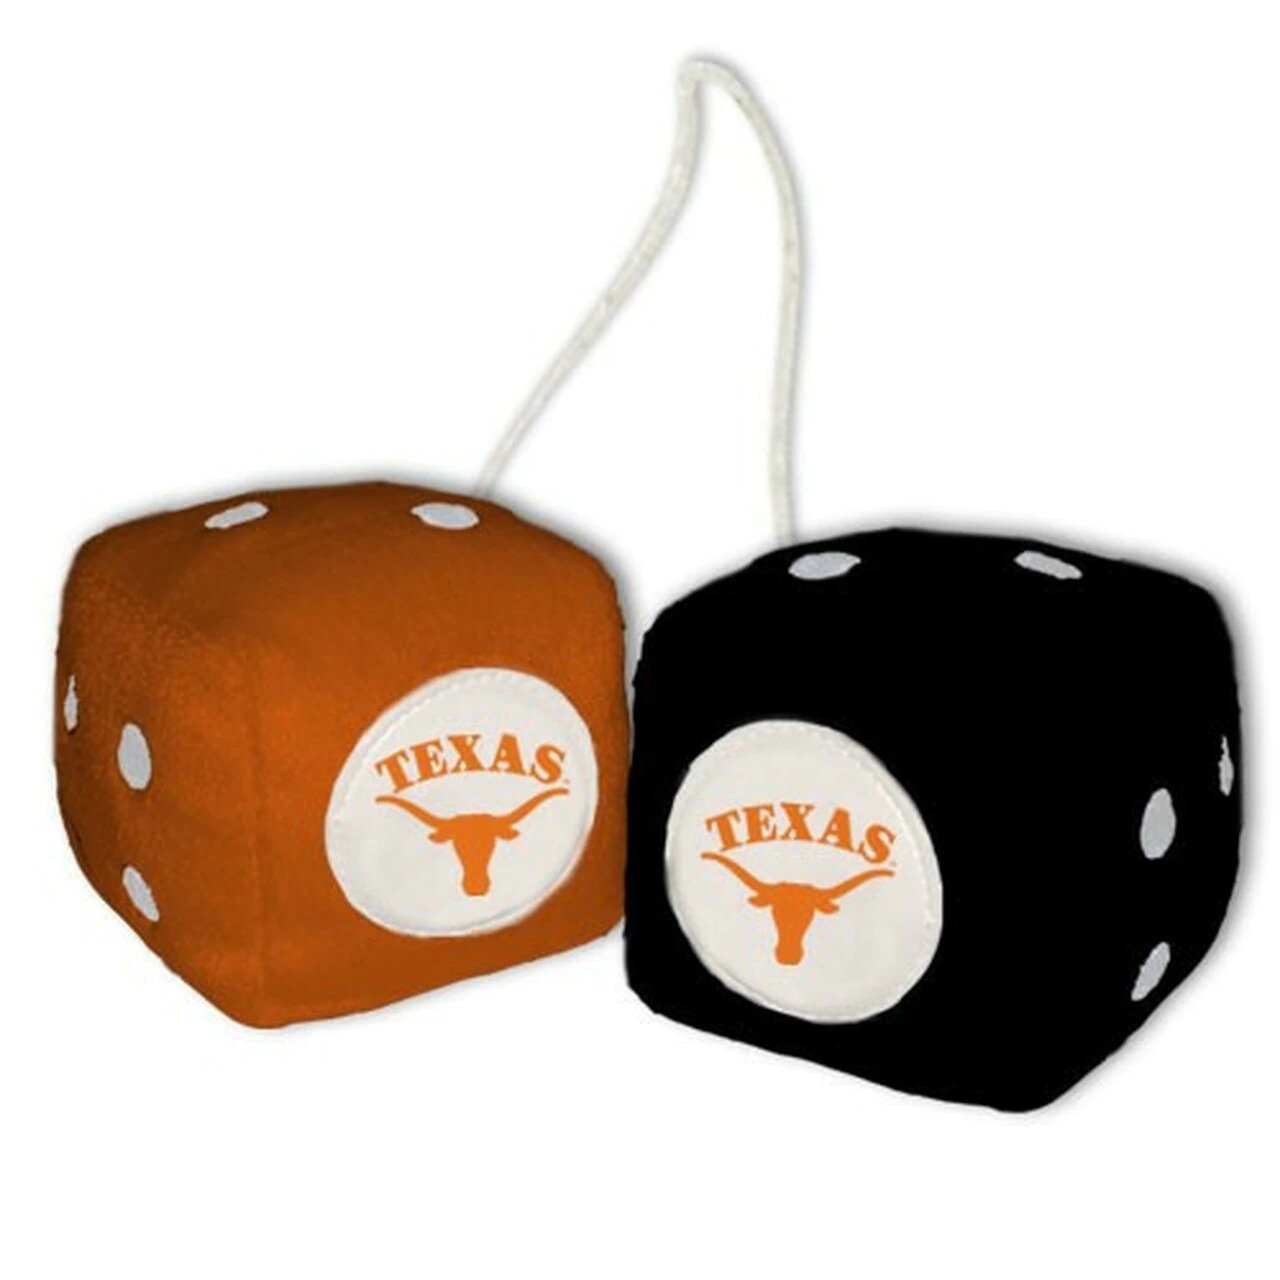 Texas Longhorns Plush Fuzzy Dice by Fremont Die